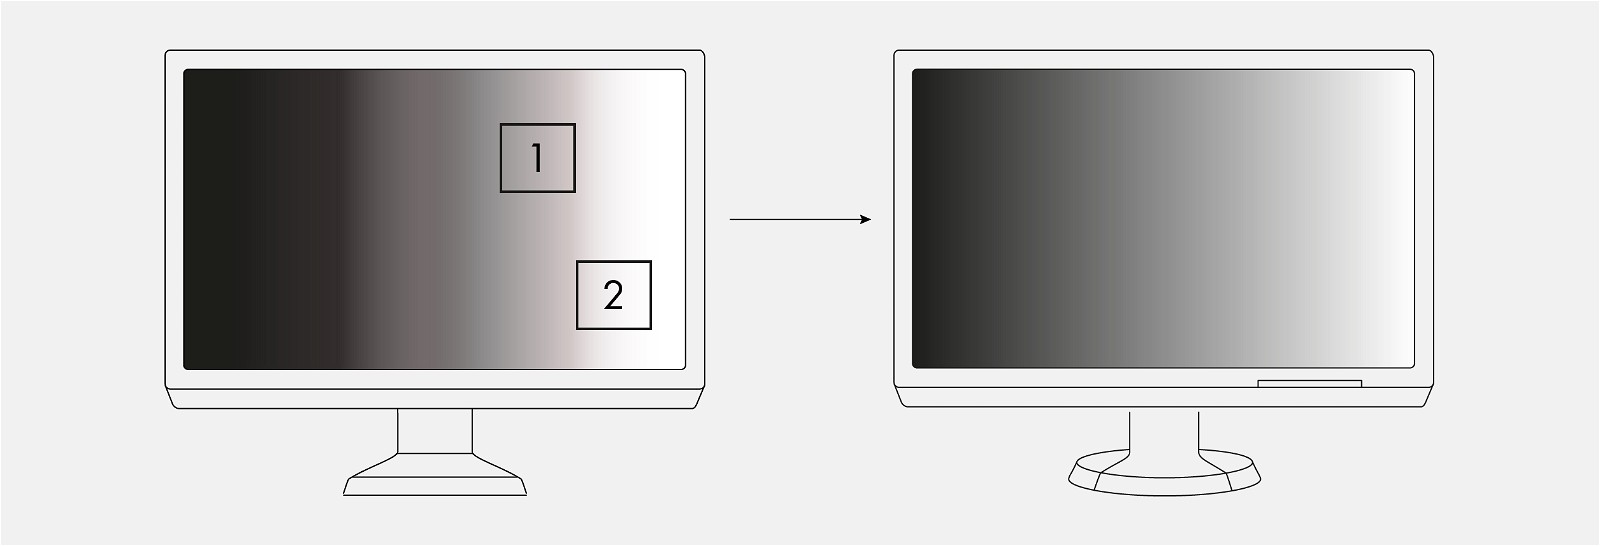 example tonal value banding and shadow banding for conventional monitors 0b5